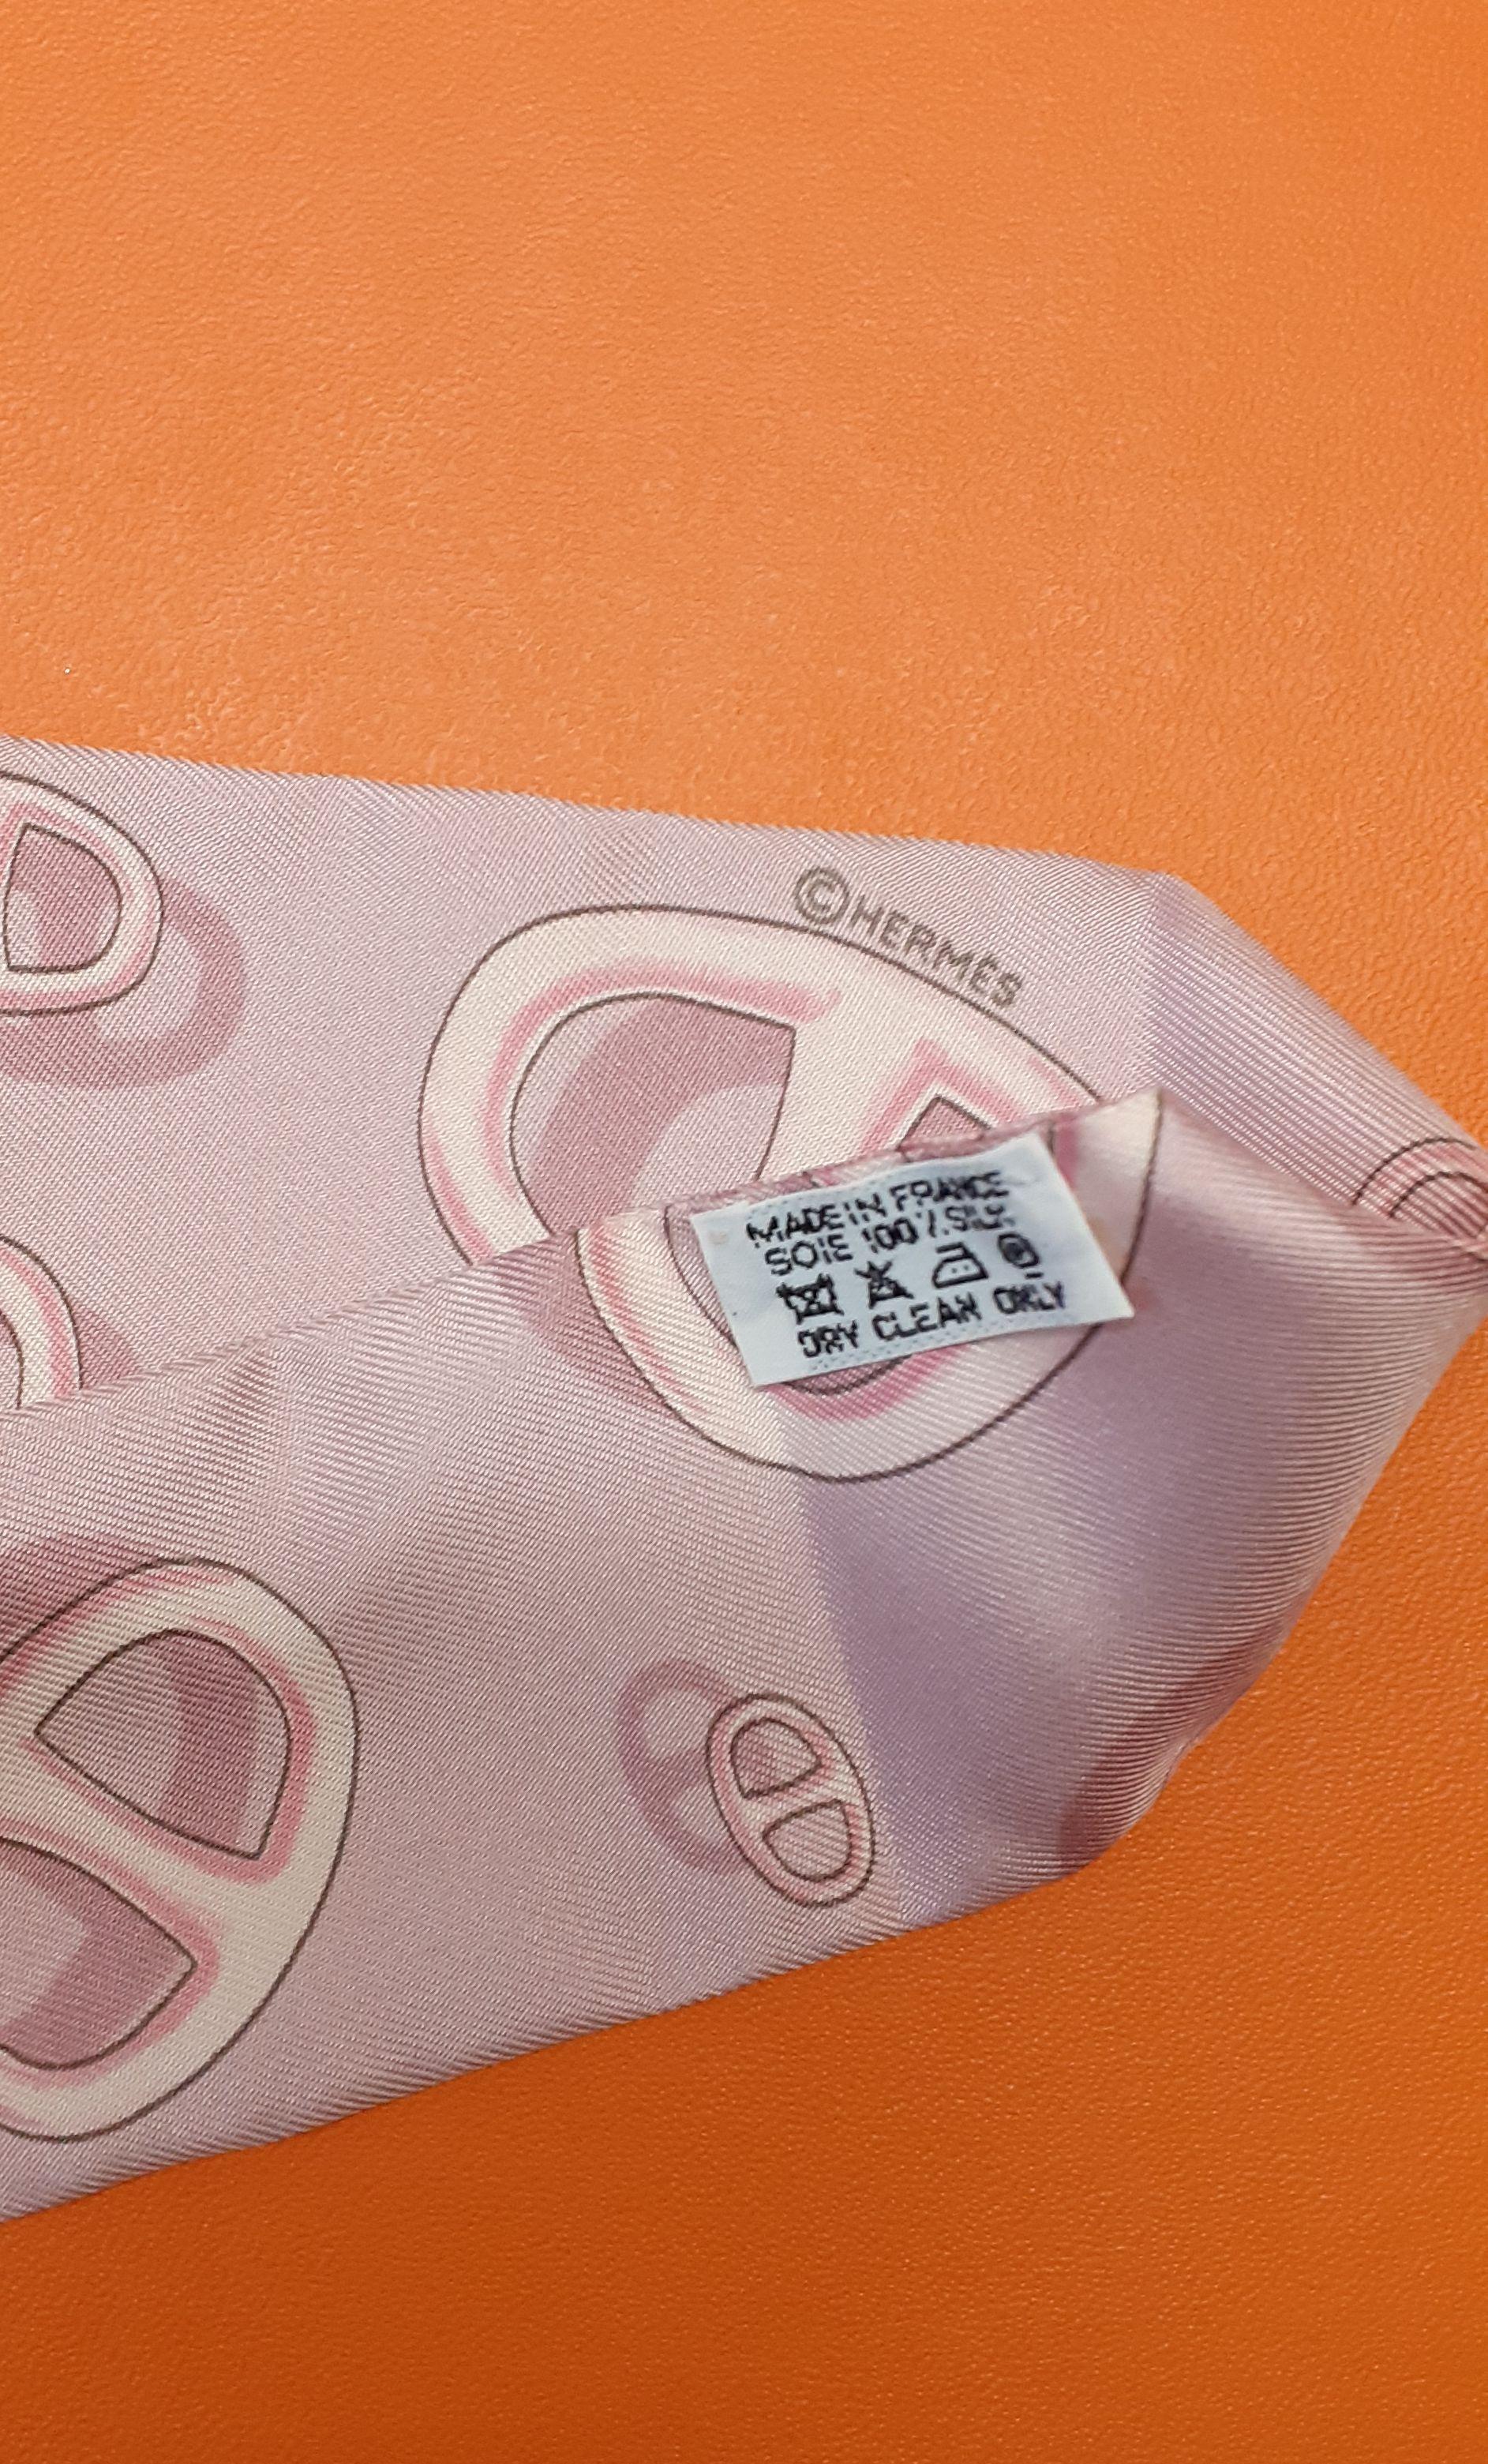 Hermès Silk Scarf Twilly Chaine d'Ancre Pink For Sale 2